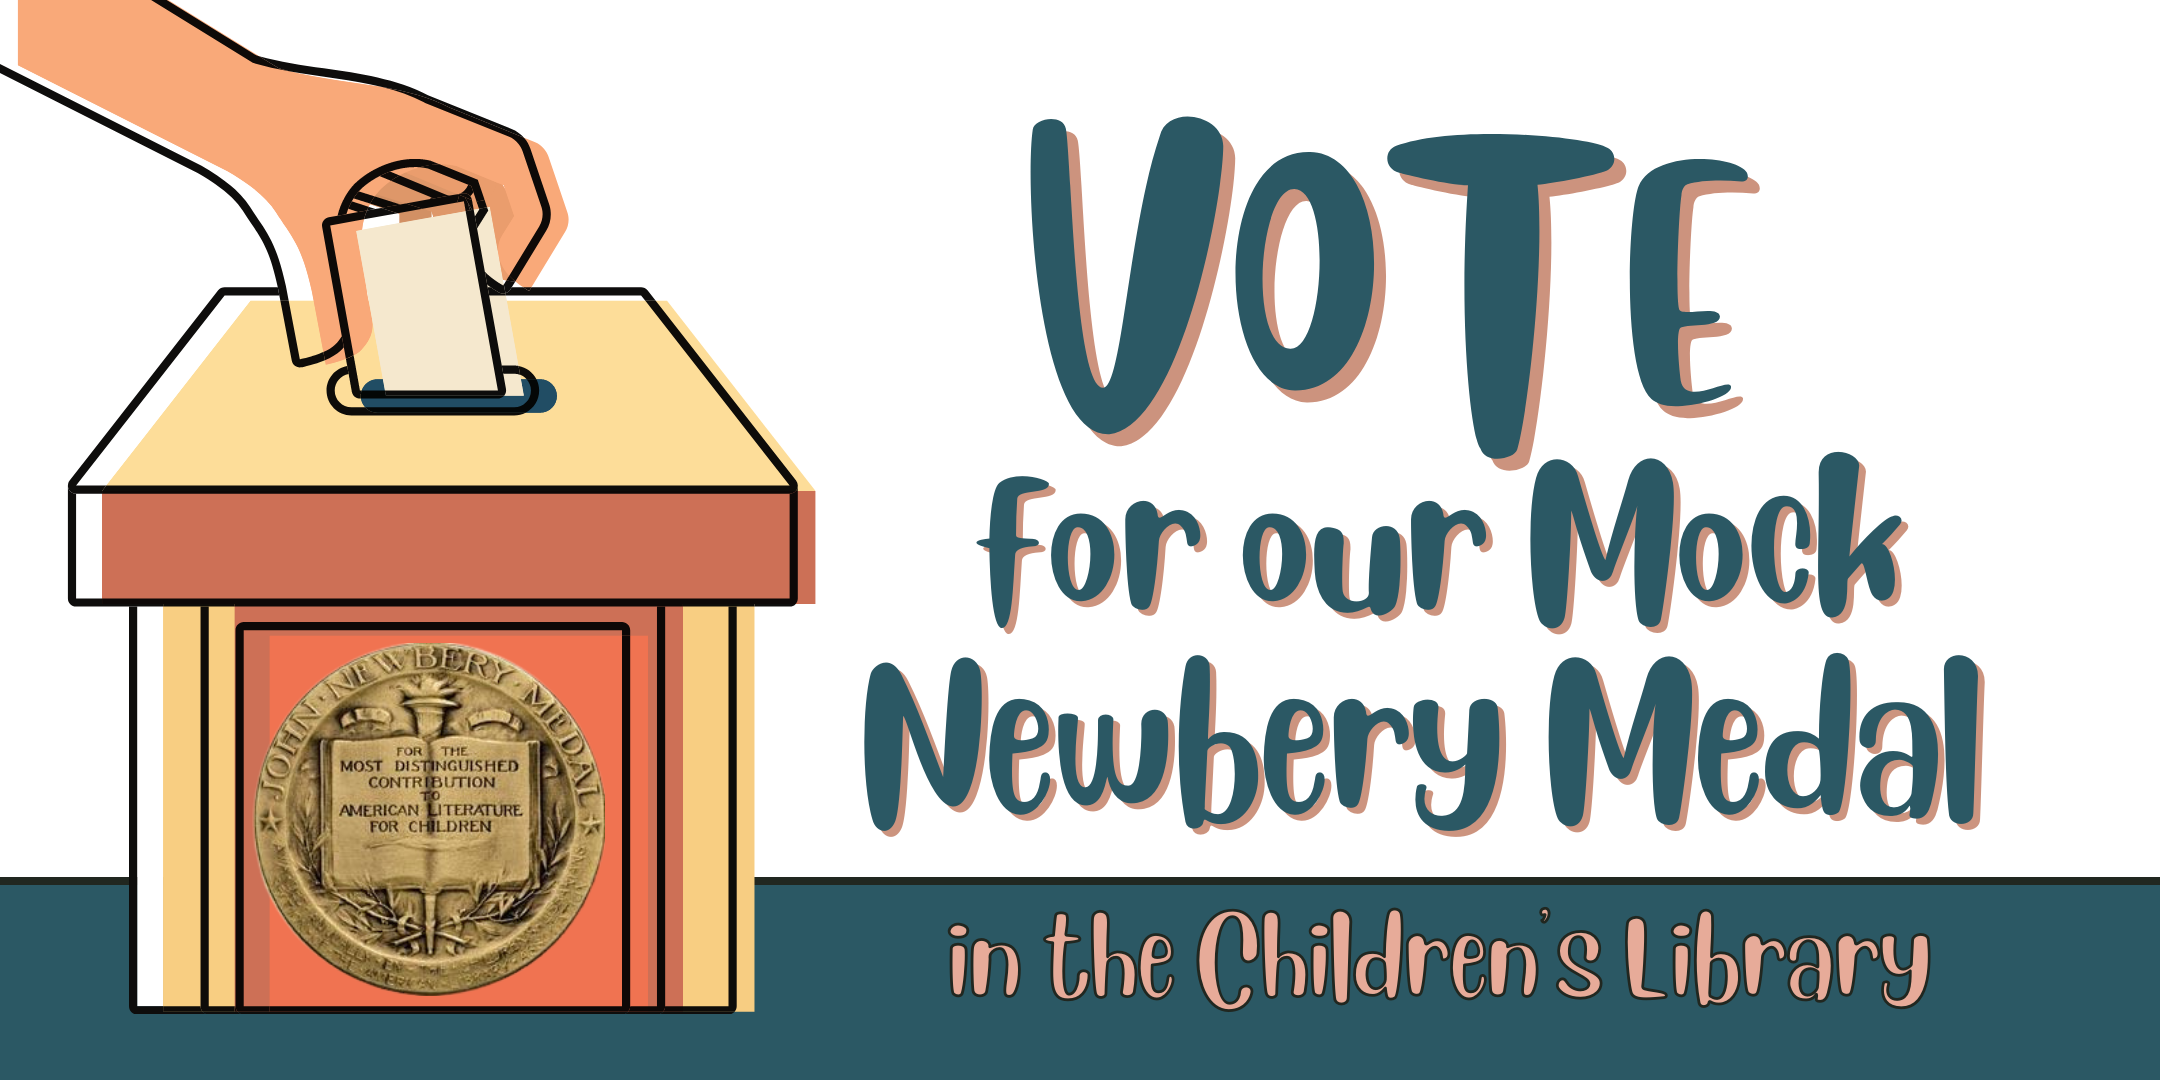 image of "Vote for our Mock Newbery Medal in the Children's Library" 